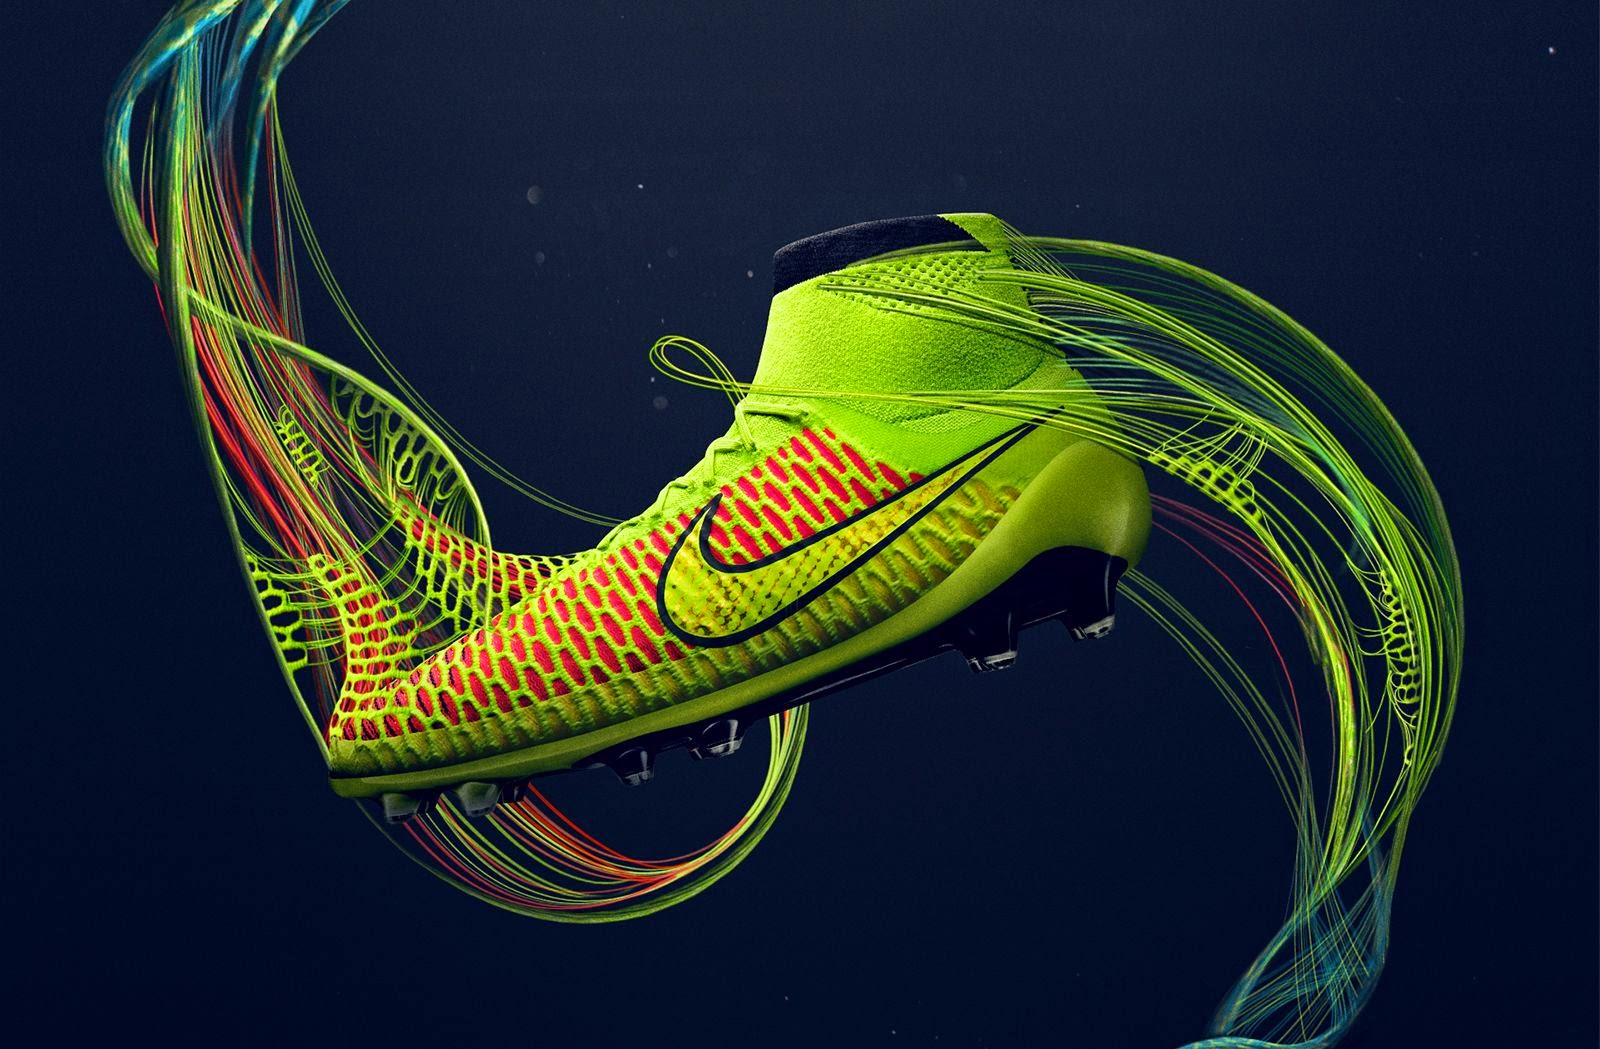 Free download 1600x1049px Nike Wallpapers Hd 2015 [1600x1049] for your ...